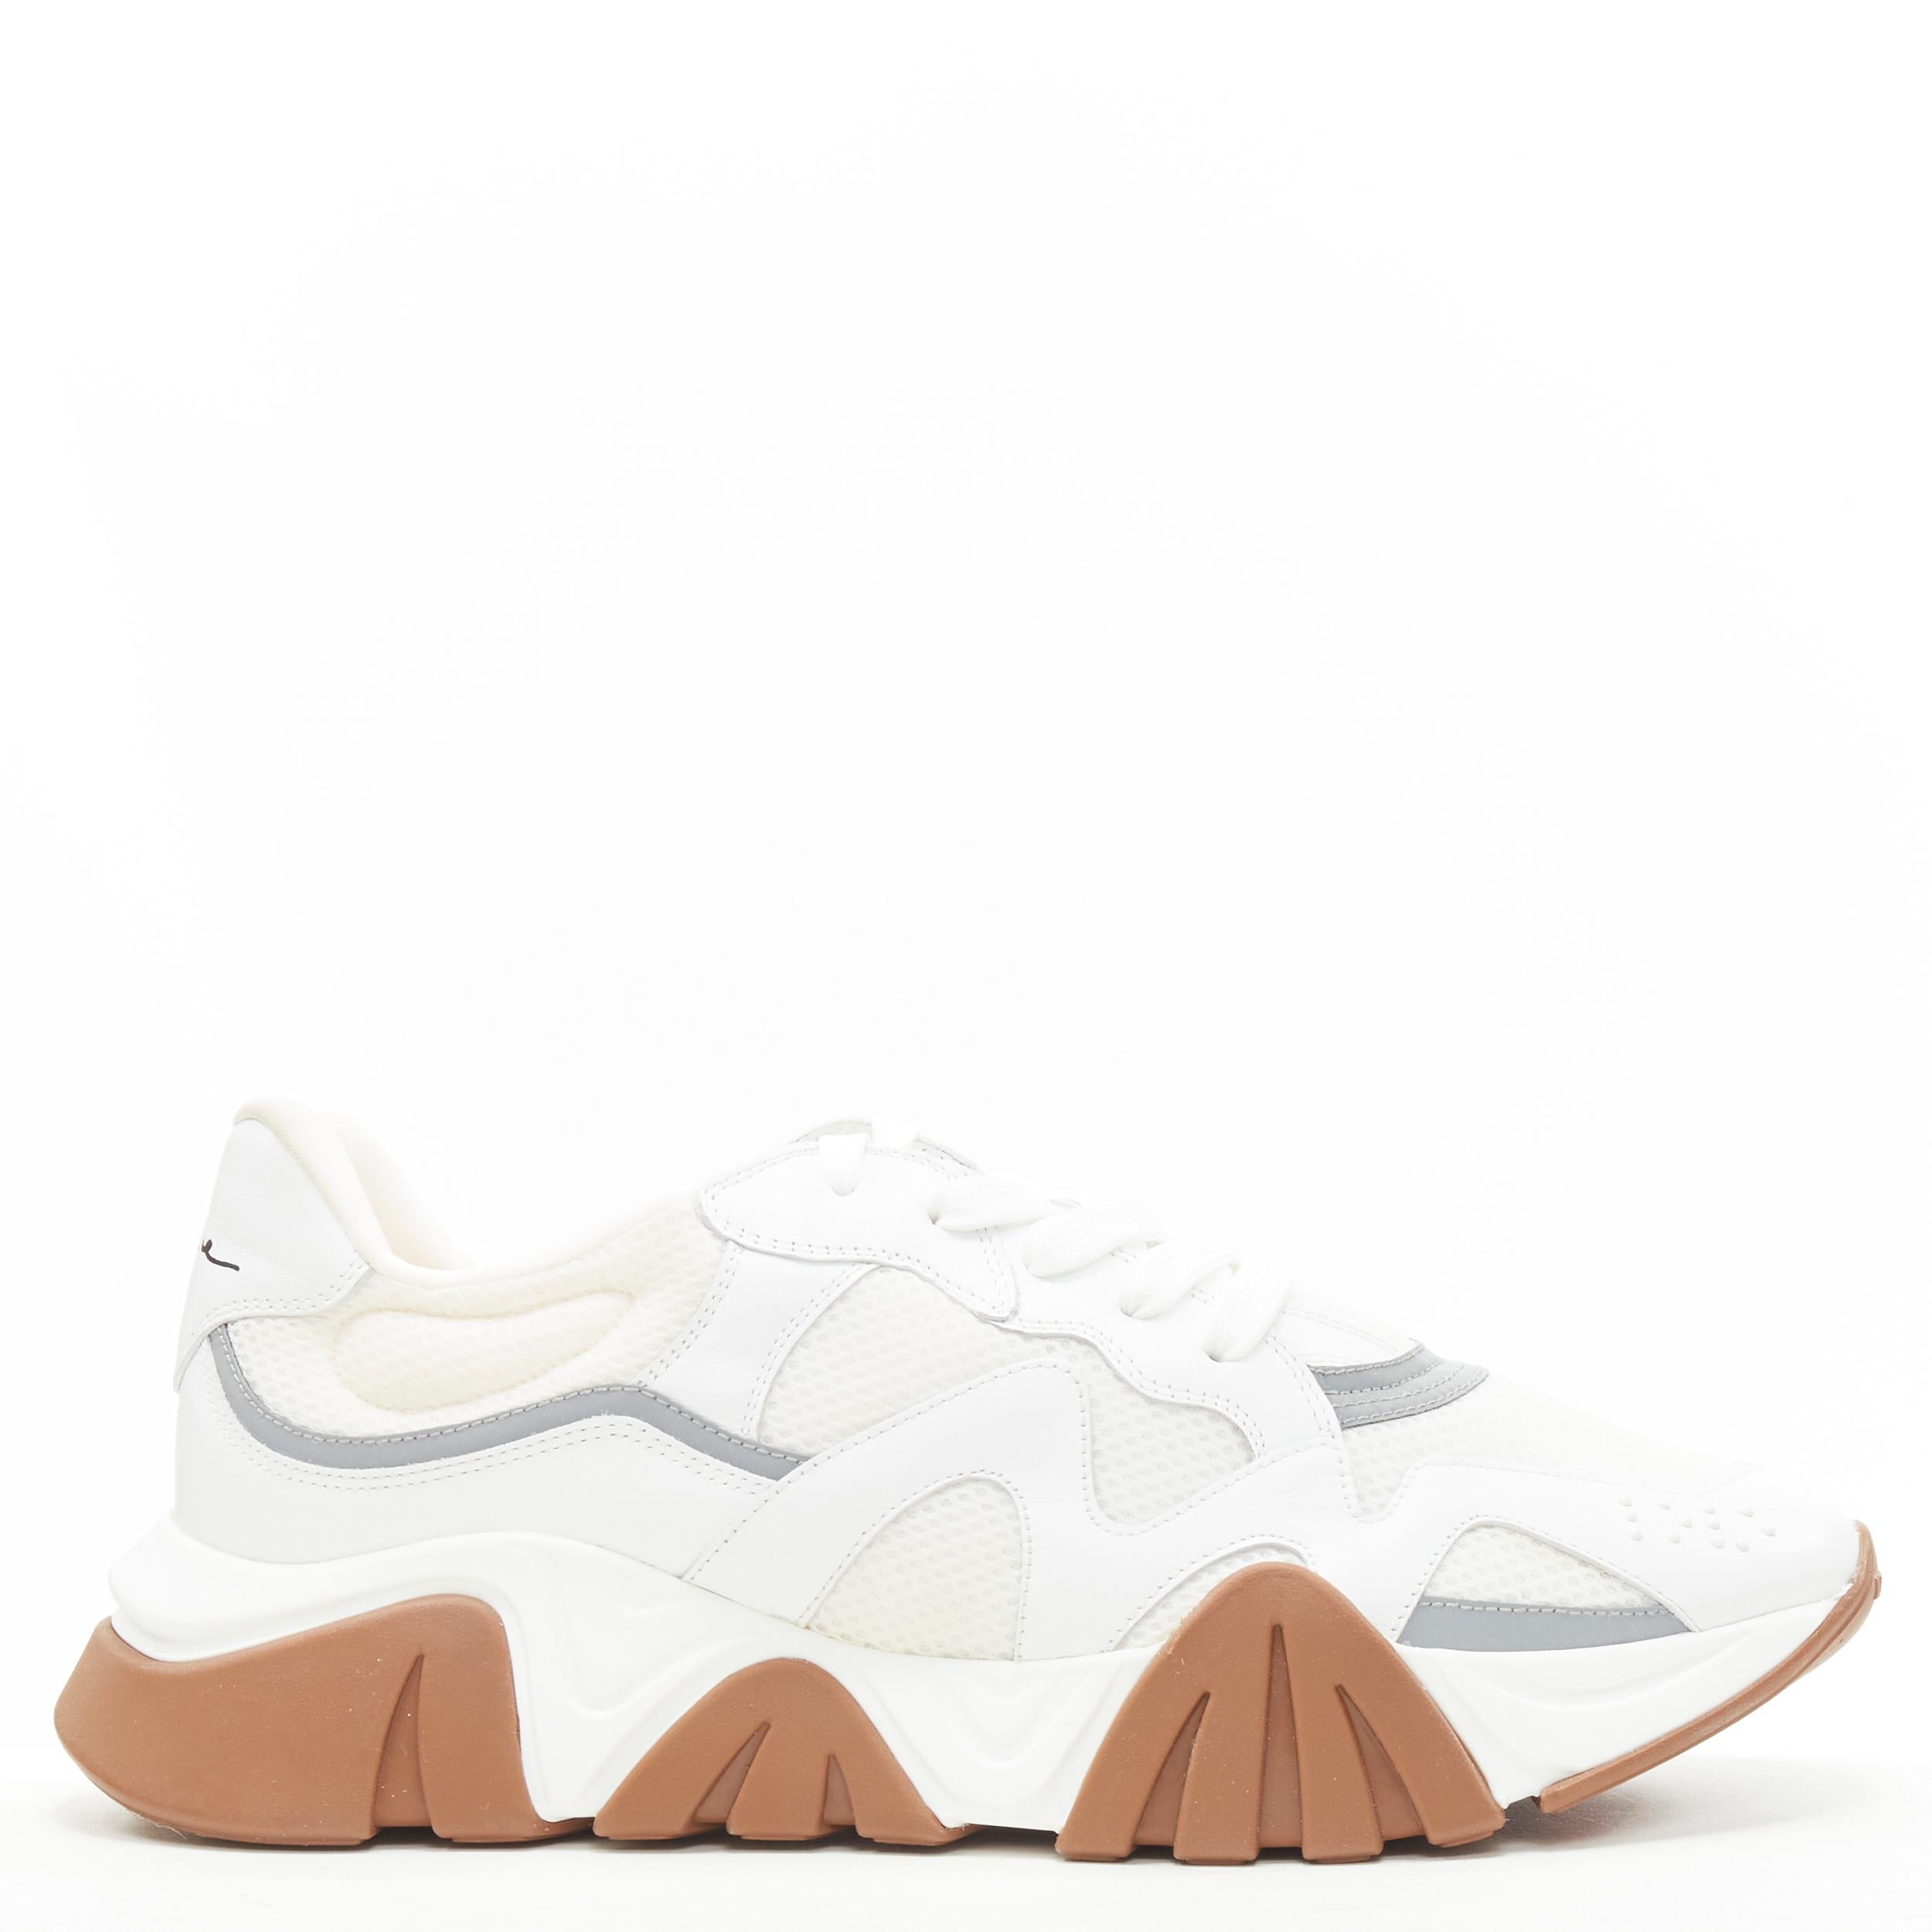 new VERSACE Squalo white gum leather mesh chunky sneakers EU45 US12 
Reference: TGAS/C00043 
Brand: Versace 
Designer: Donatella Versace 
Model: Squalo 
Collection: 2020 Runway 
Material: Mesh 
Color: White 
Pattern: Solid 
Closure: Lace 
Extra